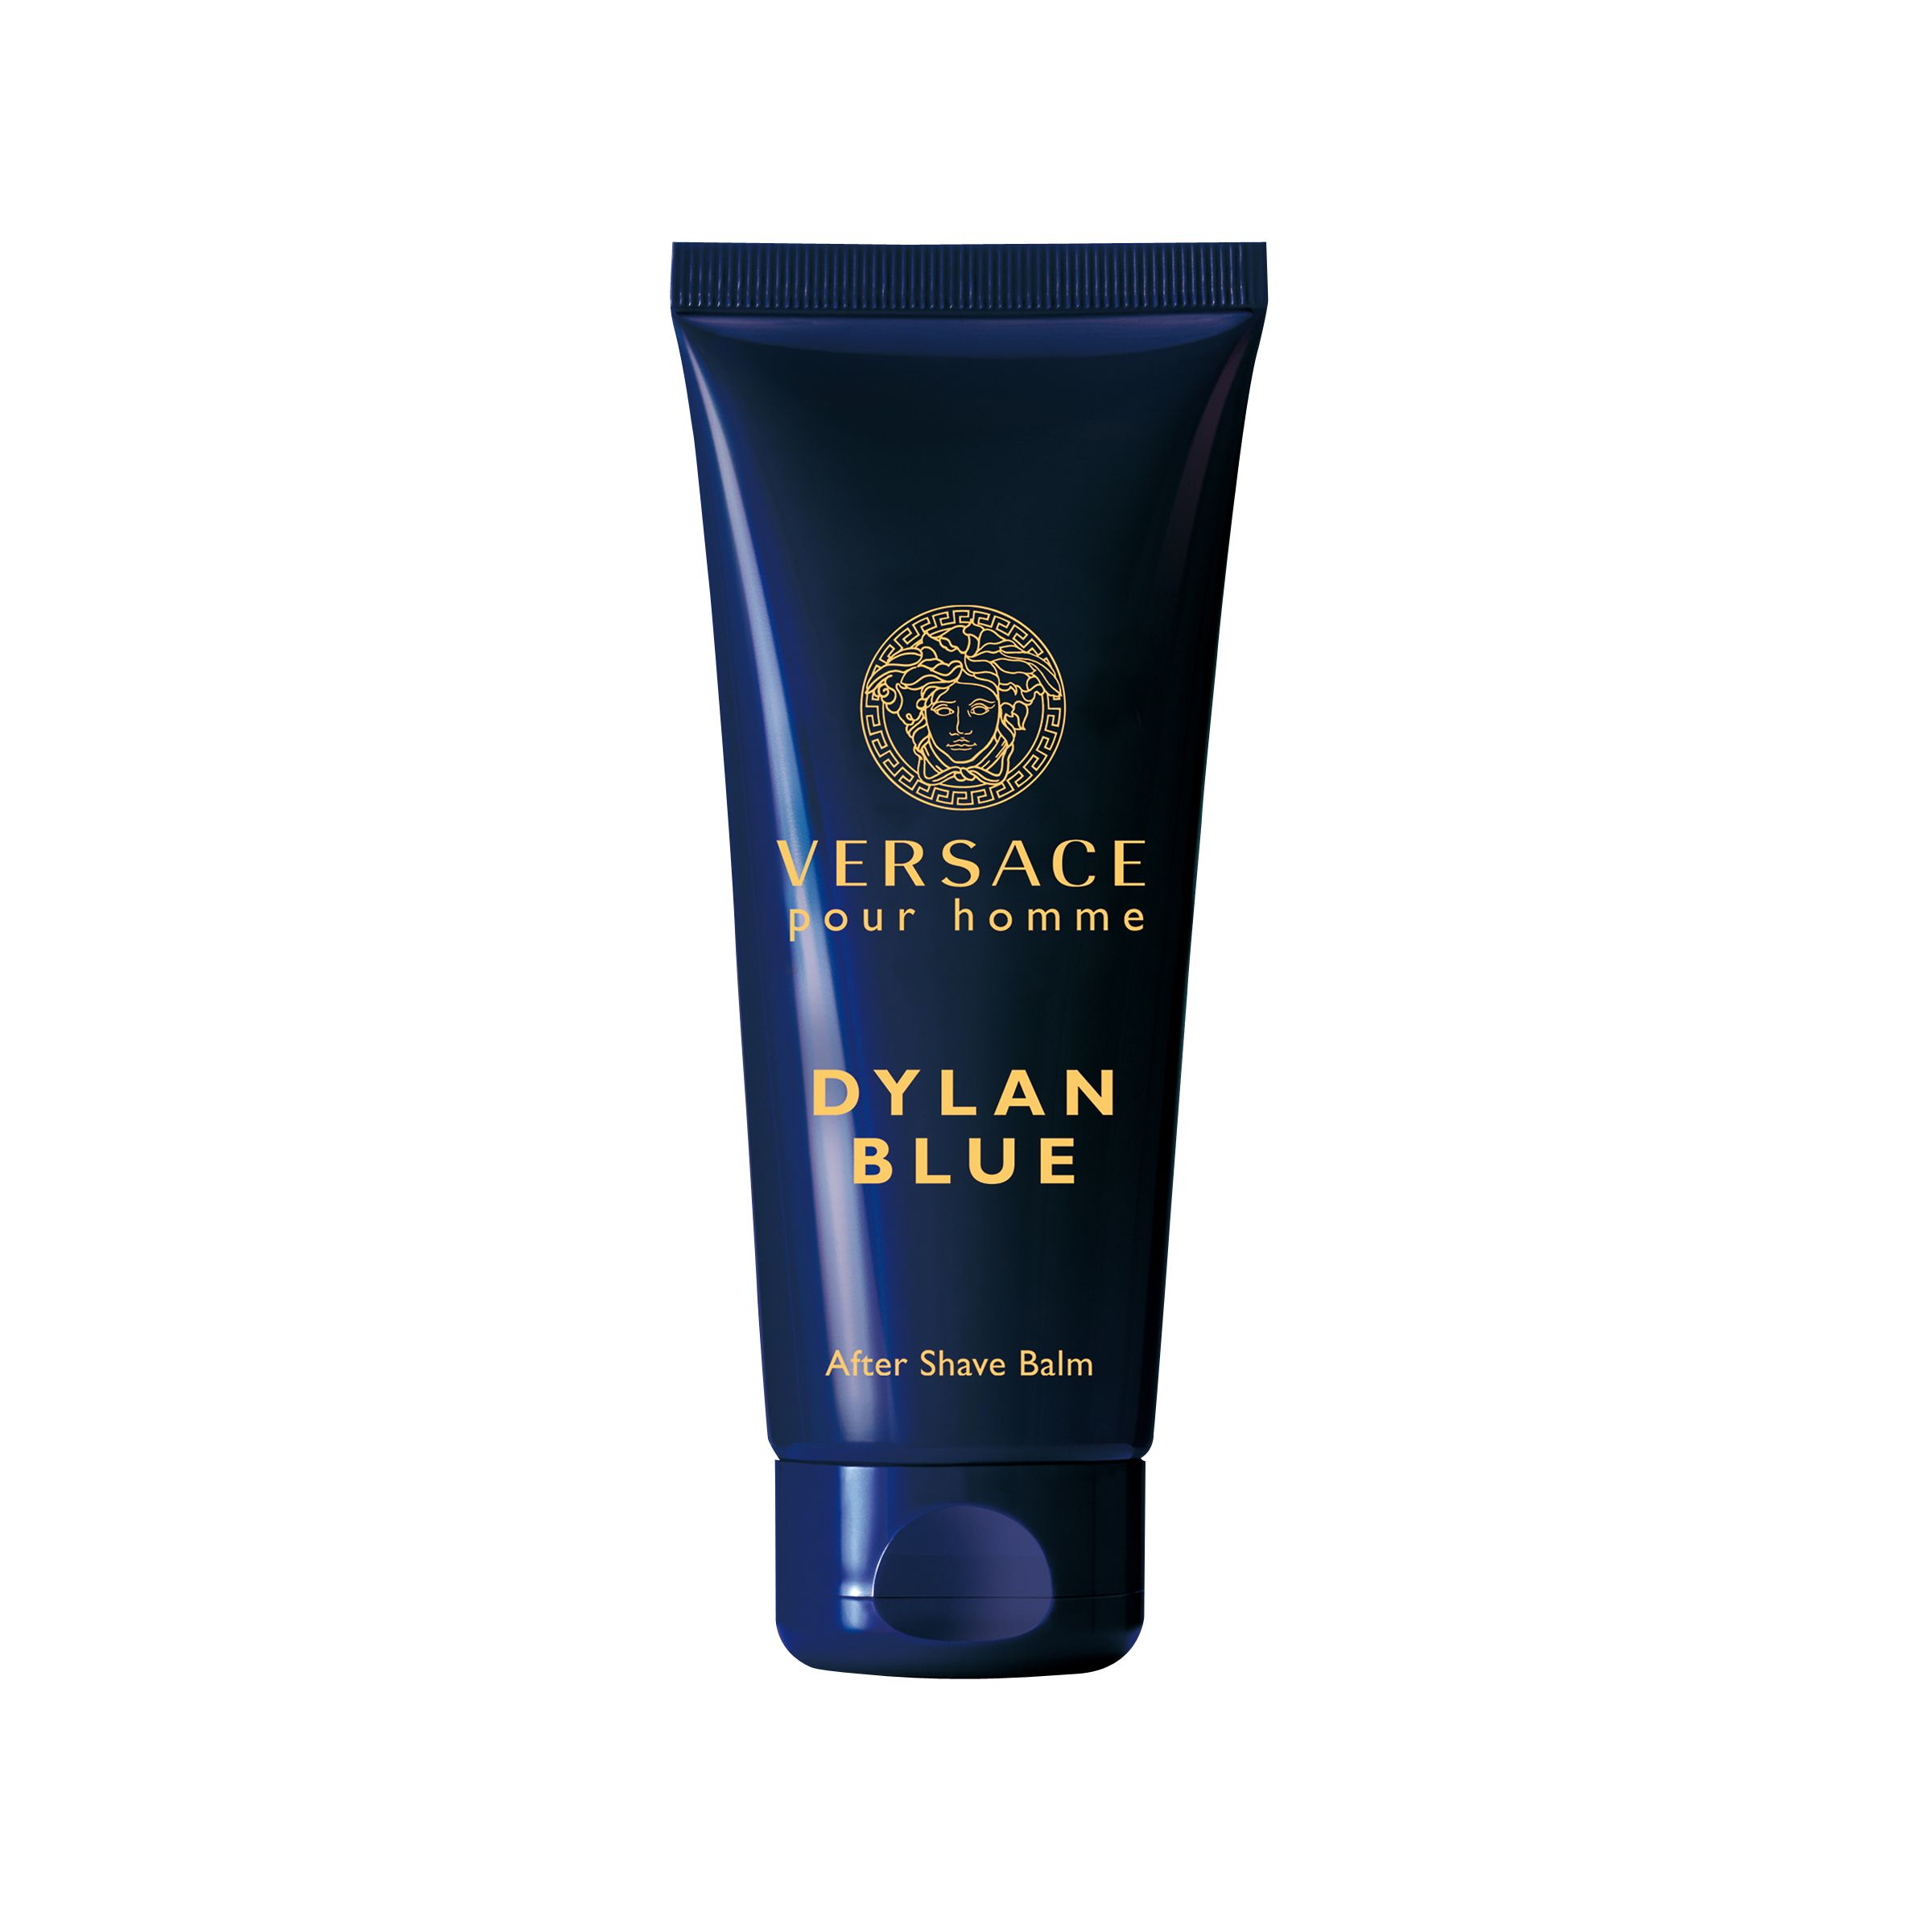 Versace Pour Homme Dylan Blue Aftershave Balm 100ml At John Lewis Partners